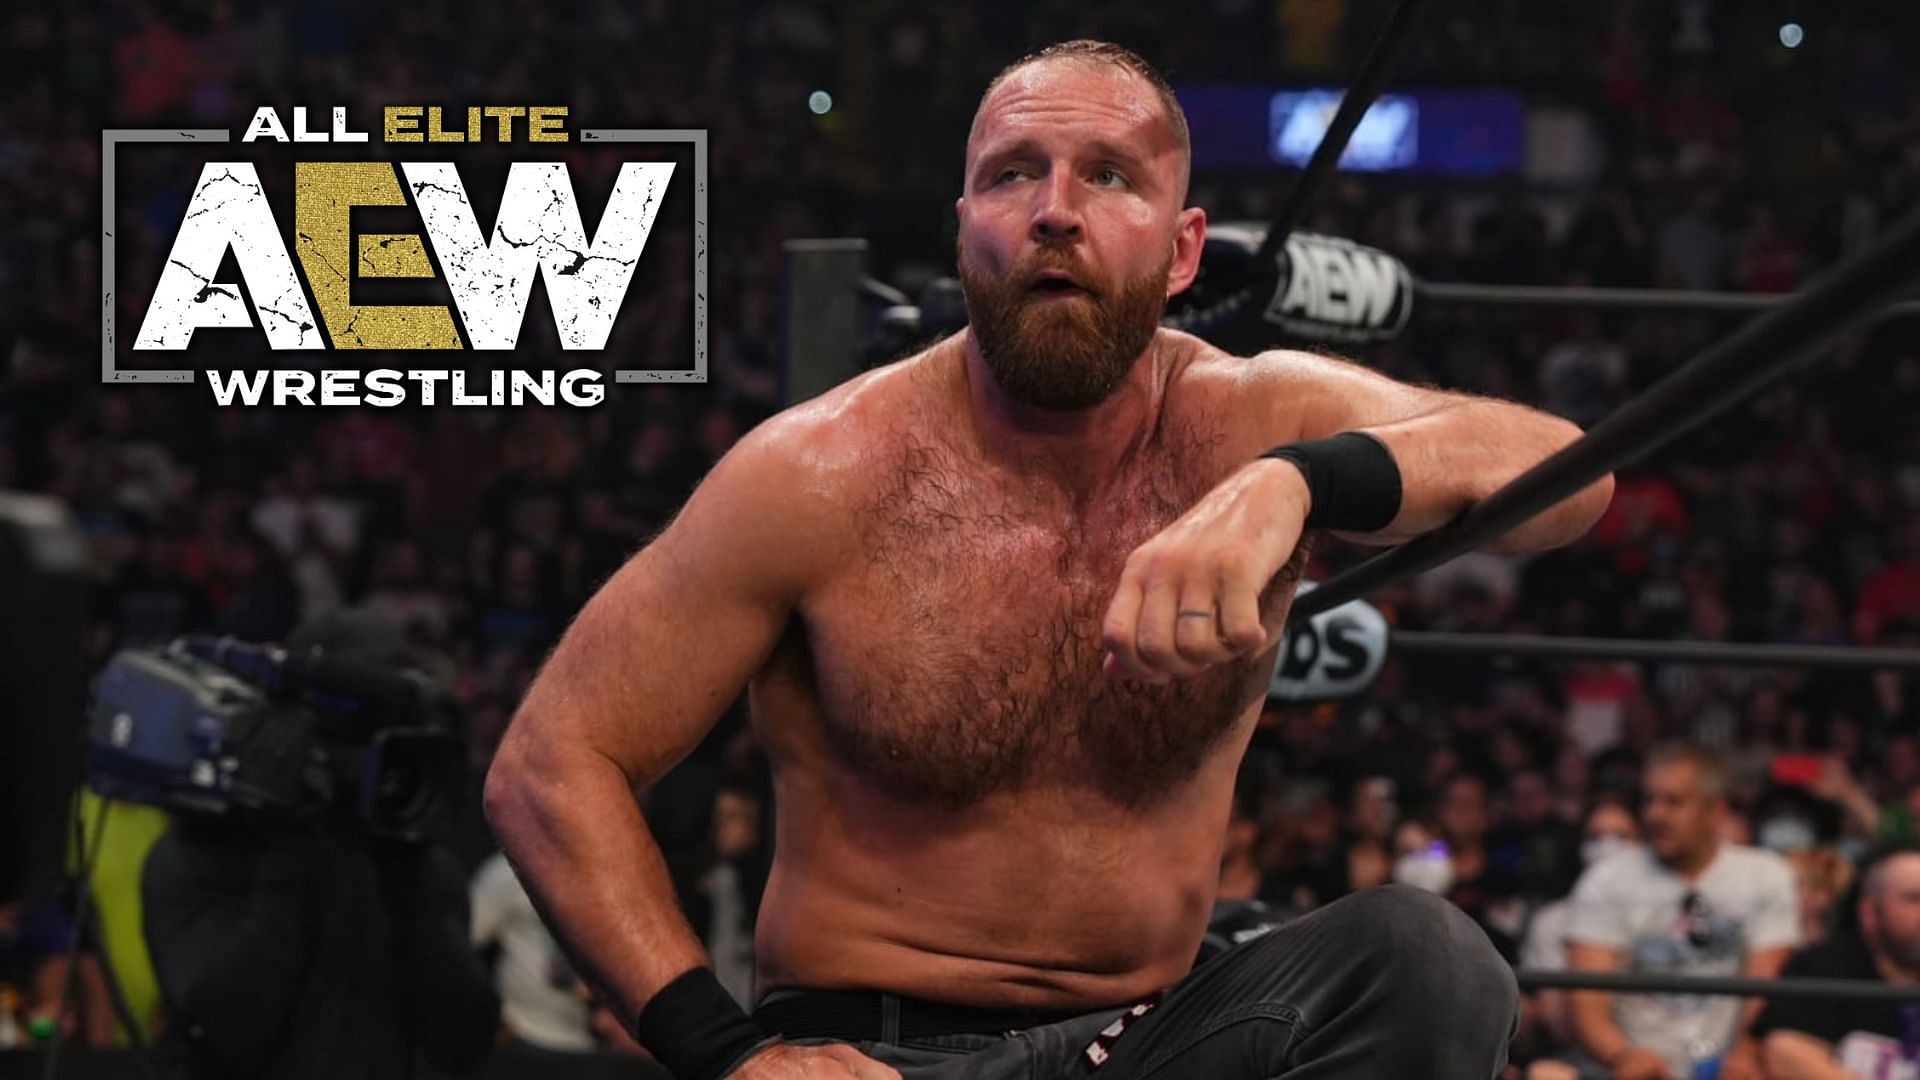 Jon Moxley recently came under fire